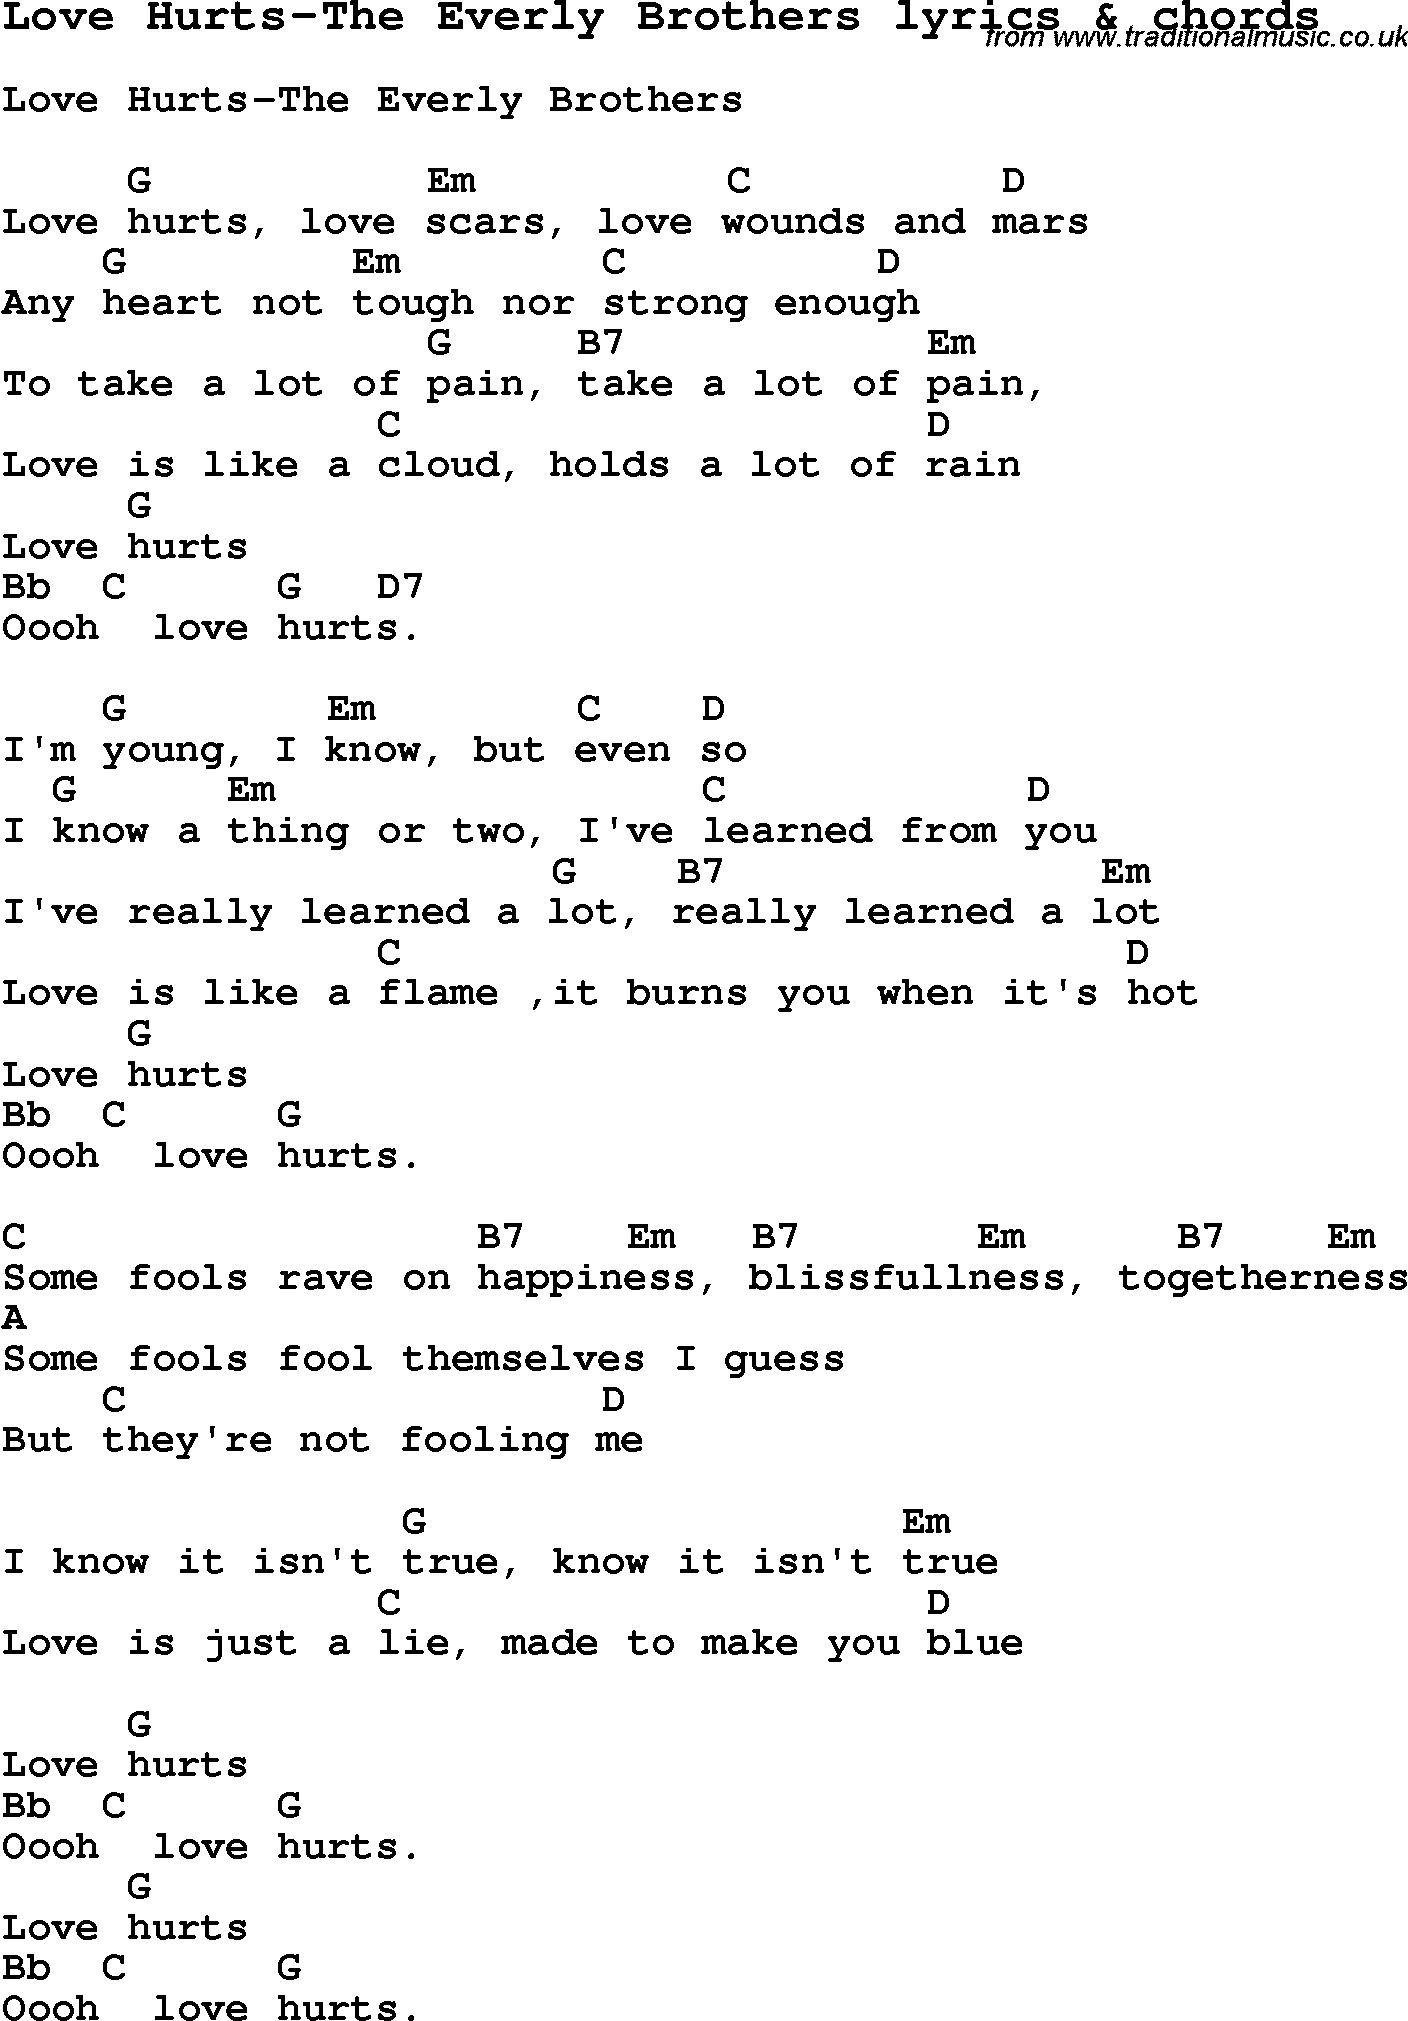 Love Song Lyrics for: Love Hurts-The Everly Brothers with chords for Ukulele, Guitar Banjo etc.